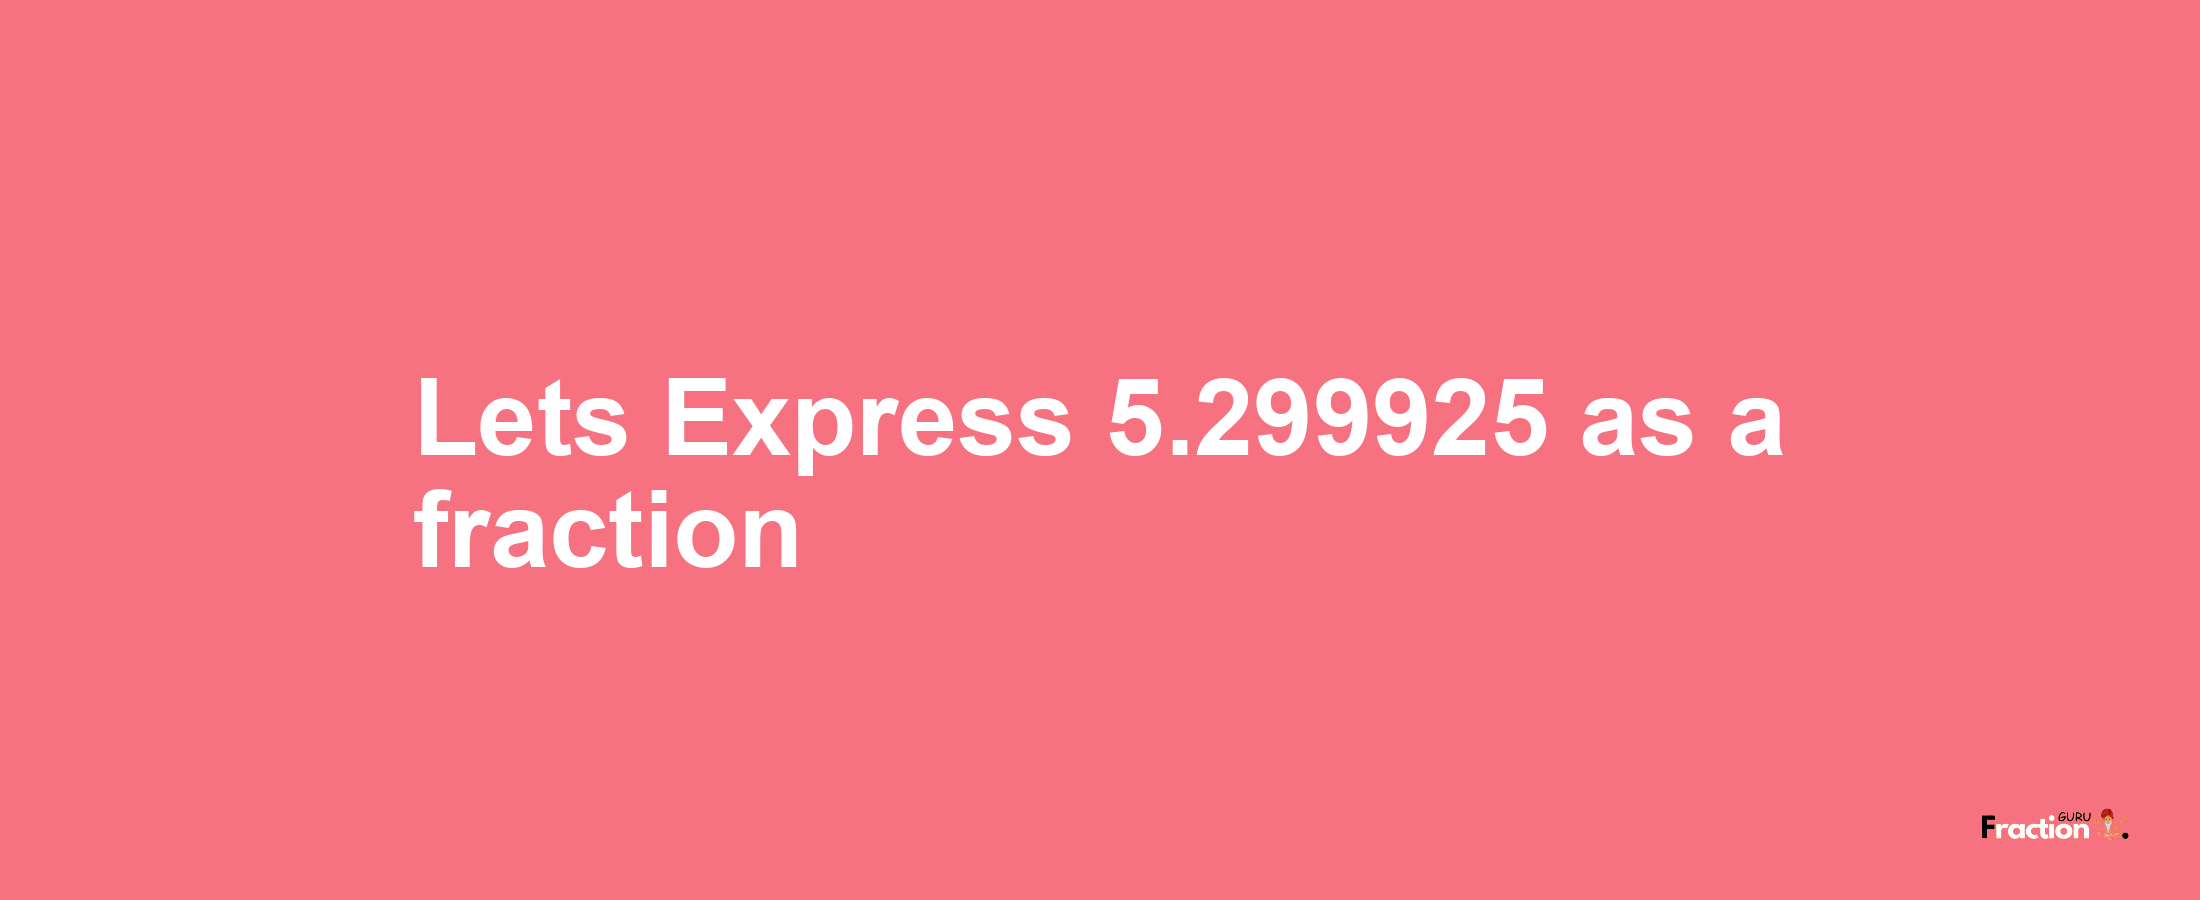 Lets Express 5.299925 as afraction